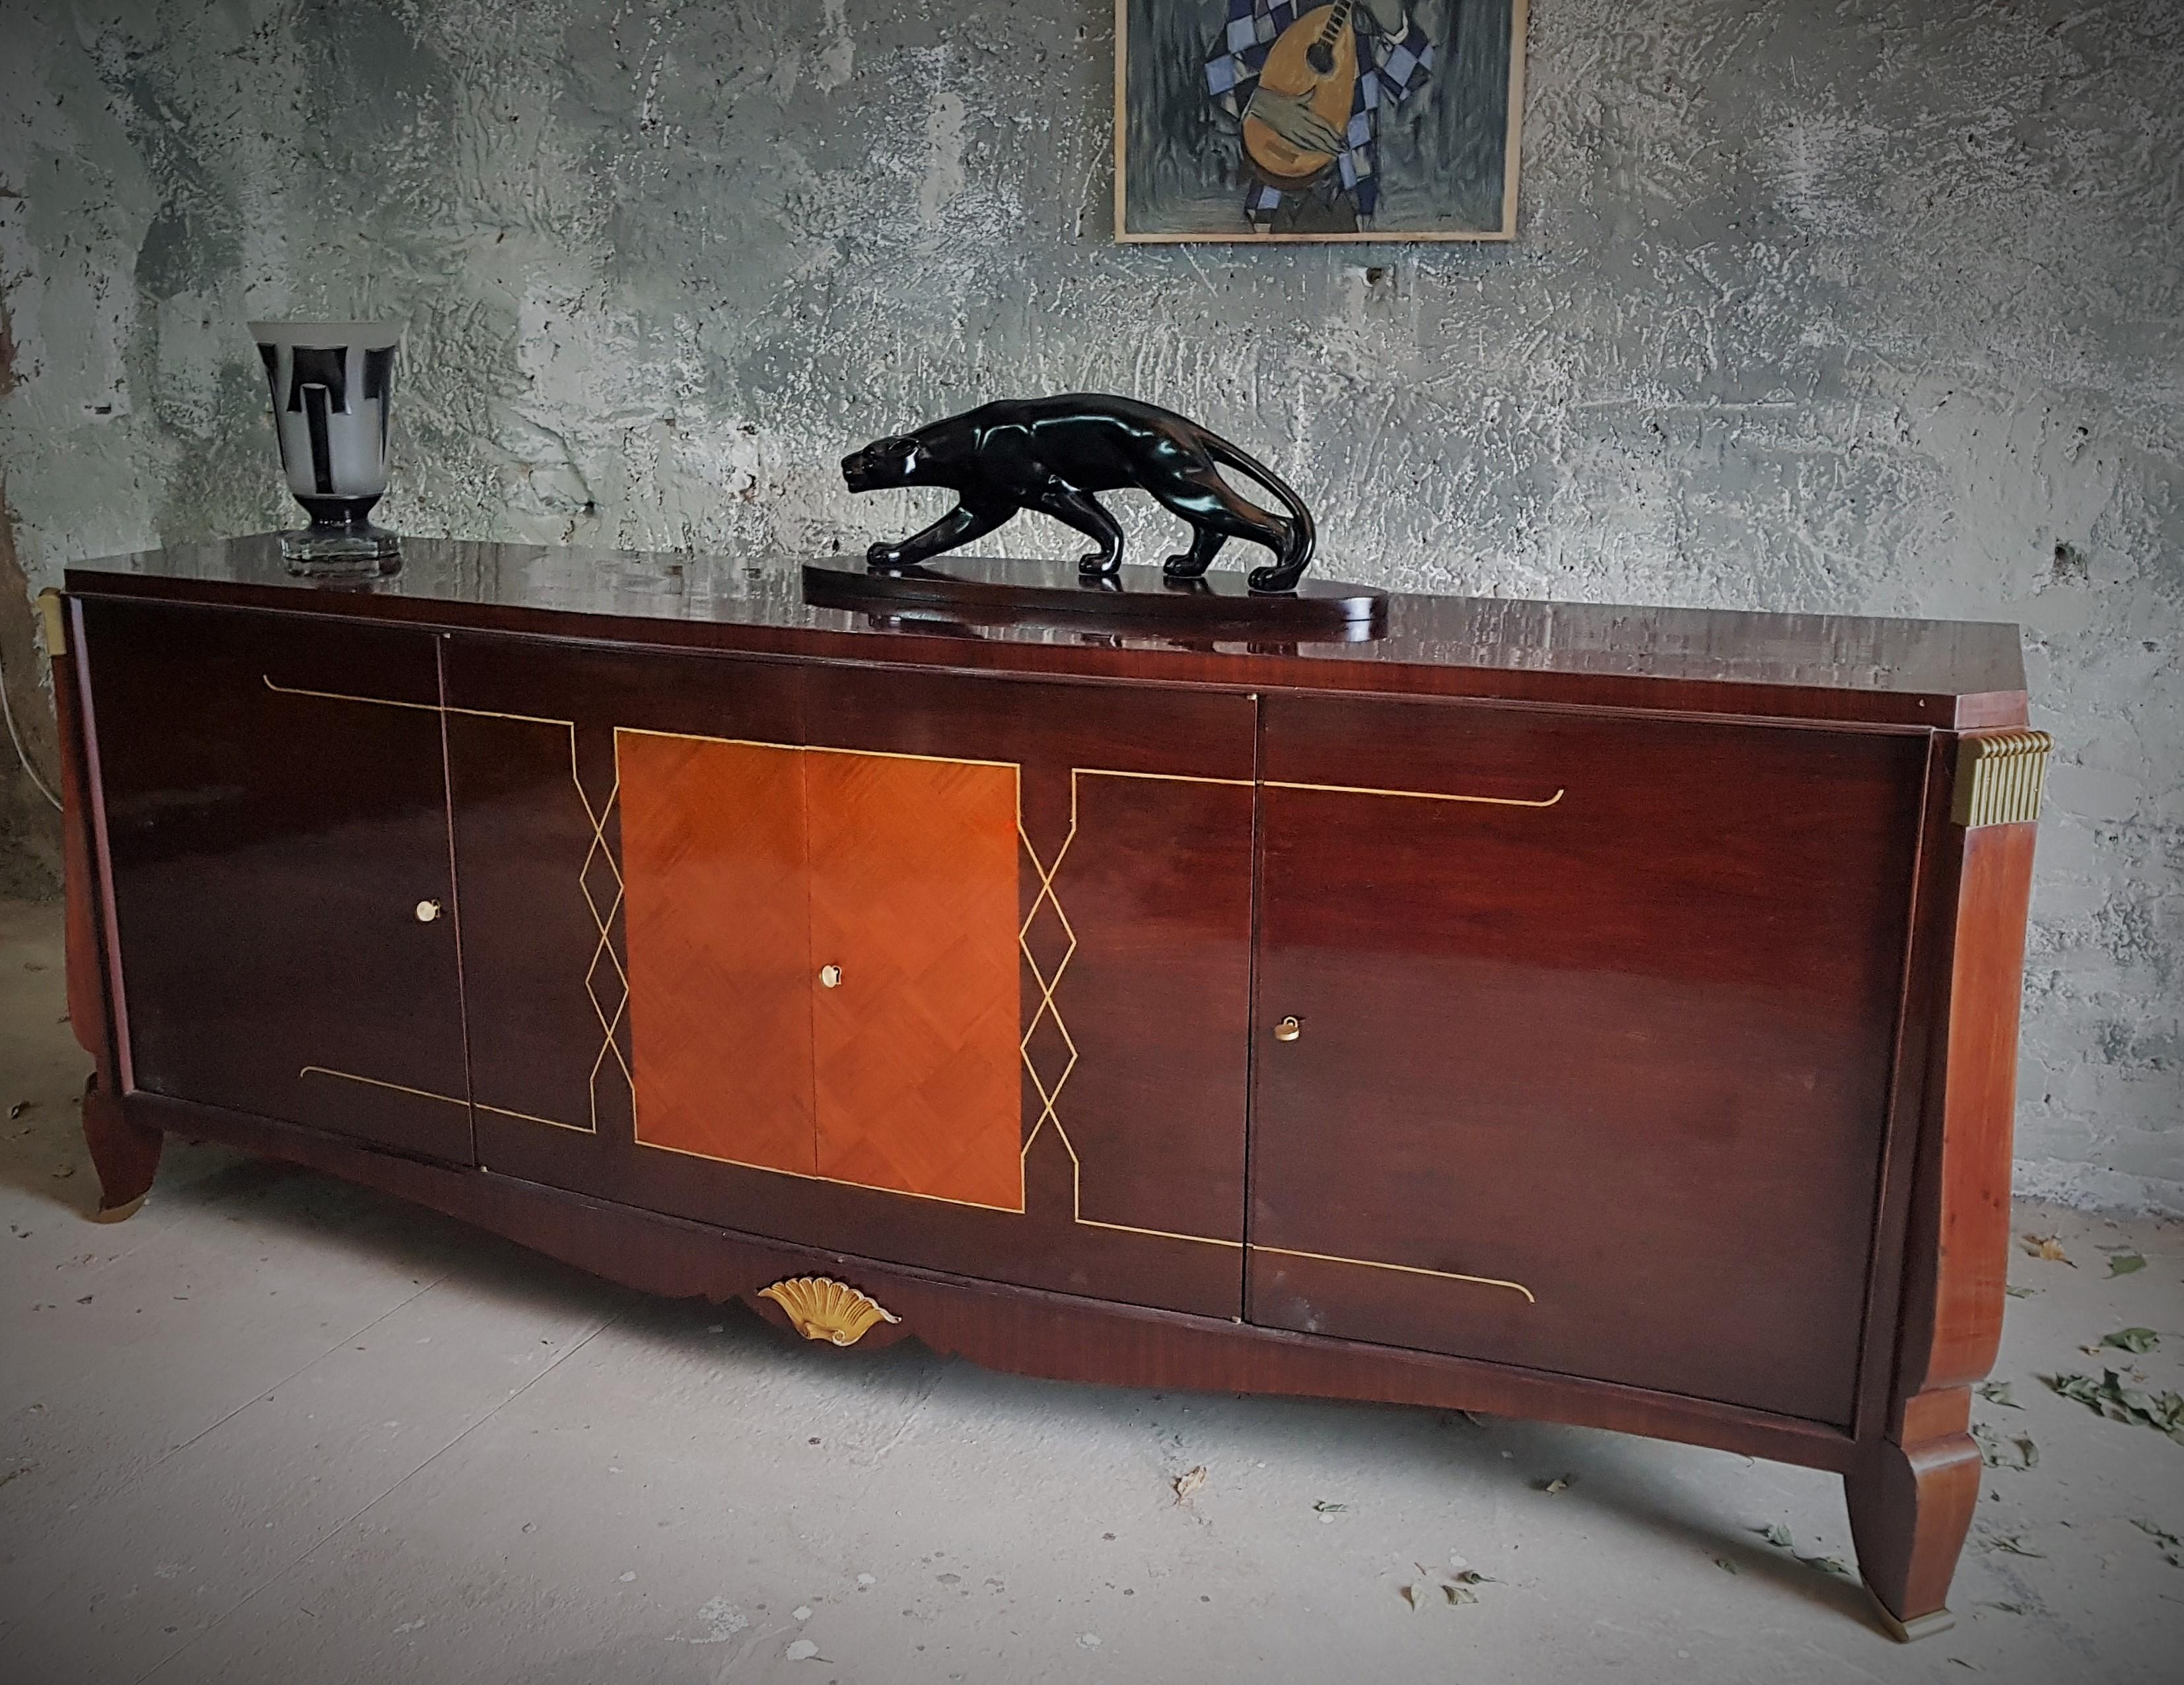 Art Deco sideboard style Maurice Rinck, France 1940.

Typical language of form maison rinck, paris.

Nice mixture of veneers. 
Bronze feet, inlays and details.

Good vintage original condition.